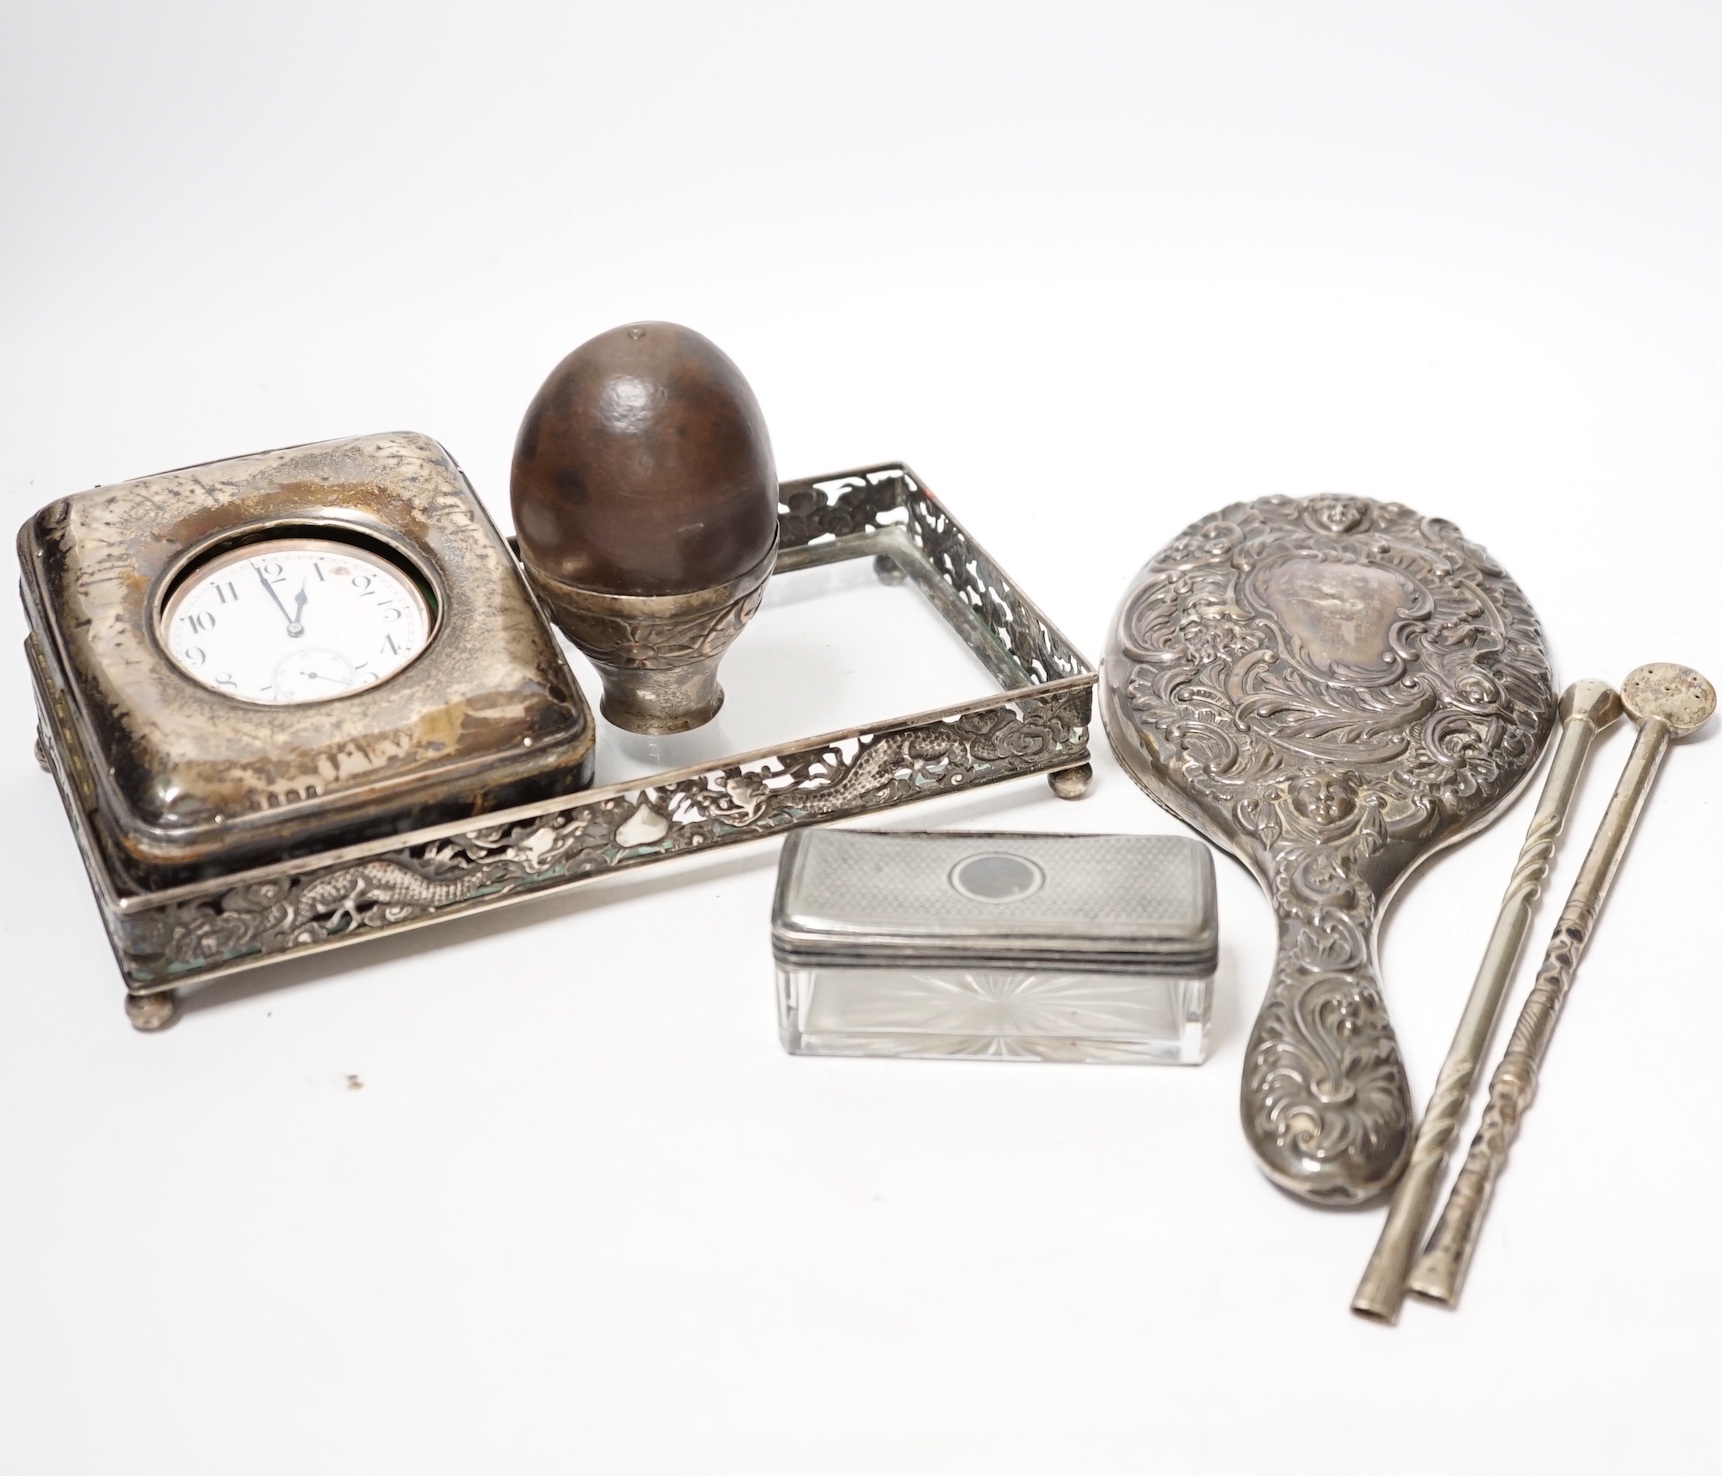 An Edwardian silver mounted travelling pocket watch case, Birmingham, 1905, with nickel cased pocket watch, together with a repousse silver mounted hand mirror, a Chinese white metal mounted glass dressing table tray and